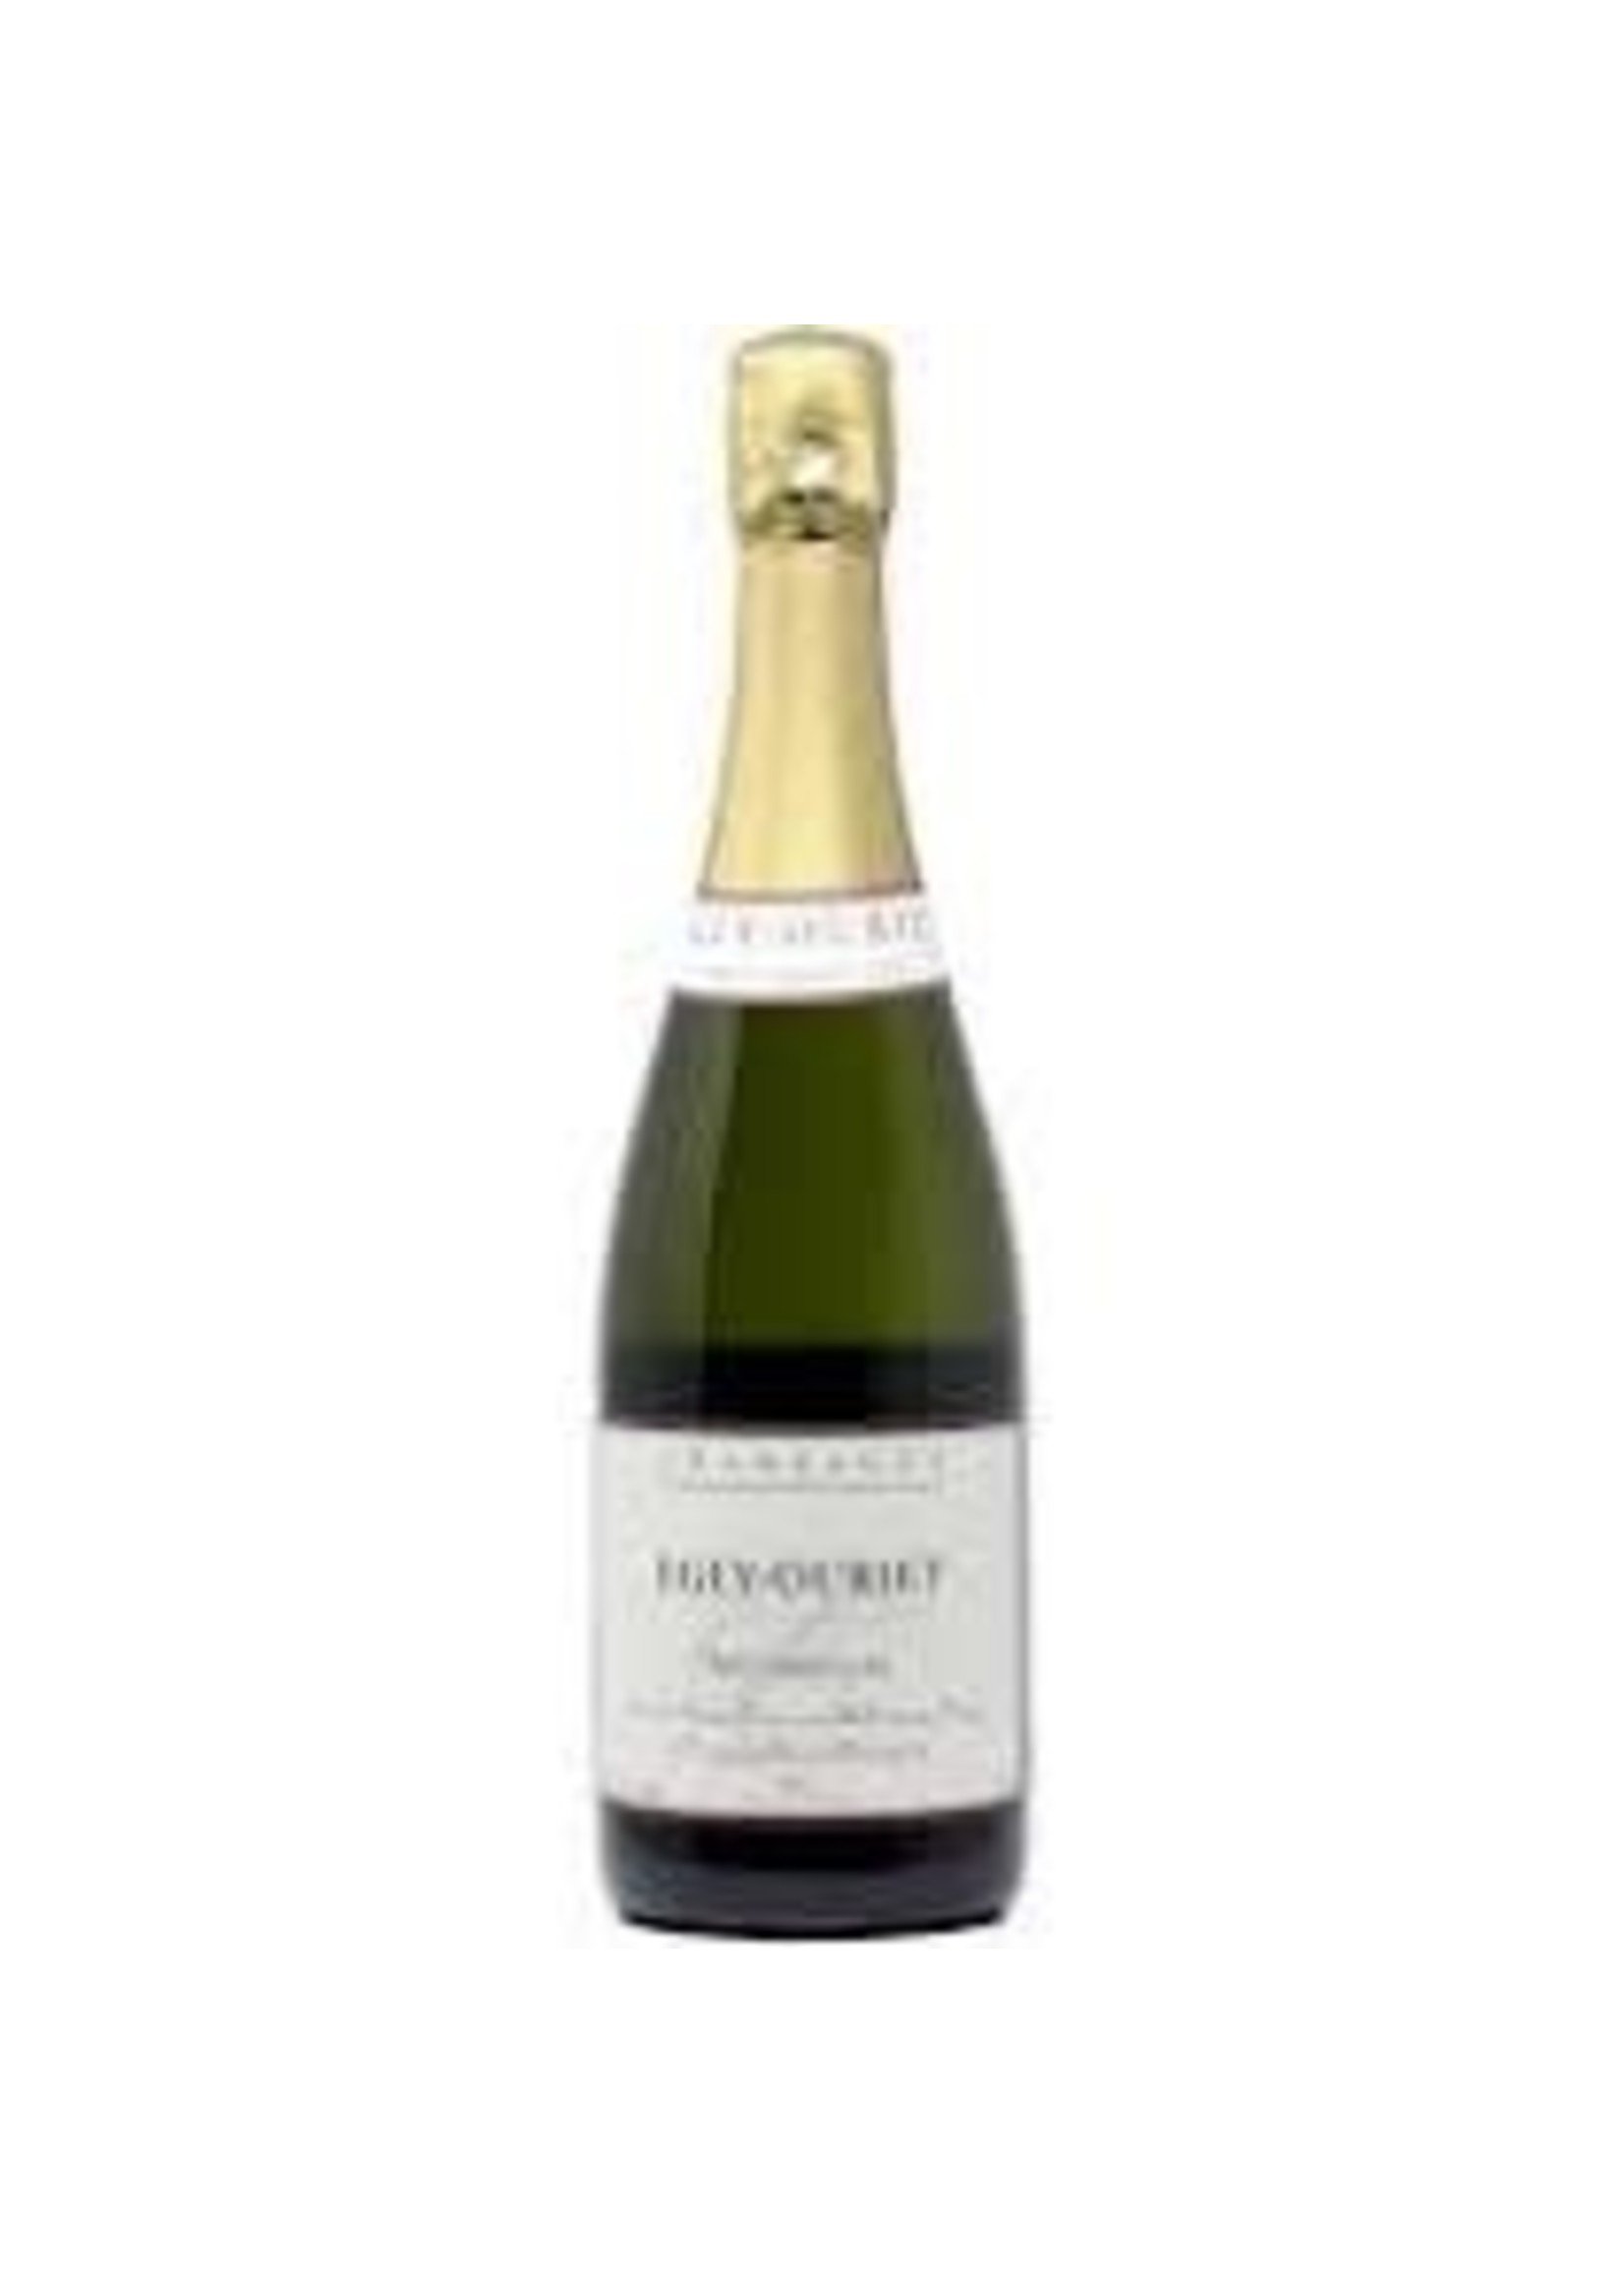 Egly Ouriet NV Champagne Brut Tradition Grand Cru 750ml